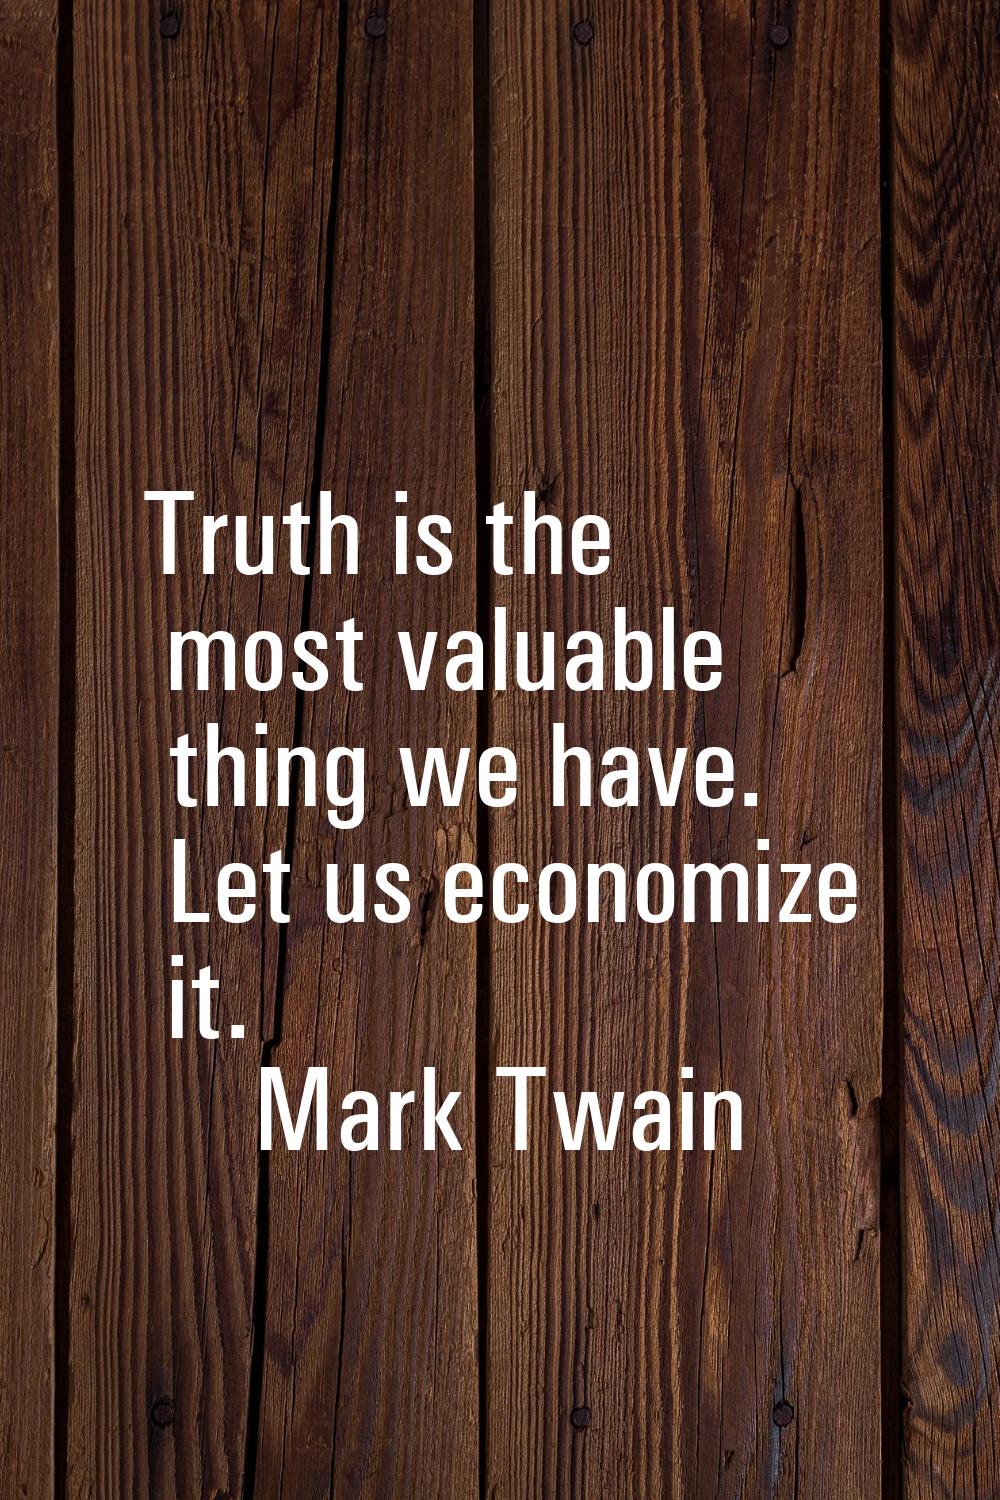 Truth is the most valuable thing we have. Let us economize it.